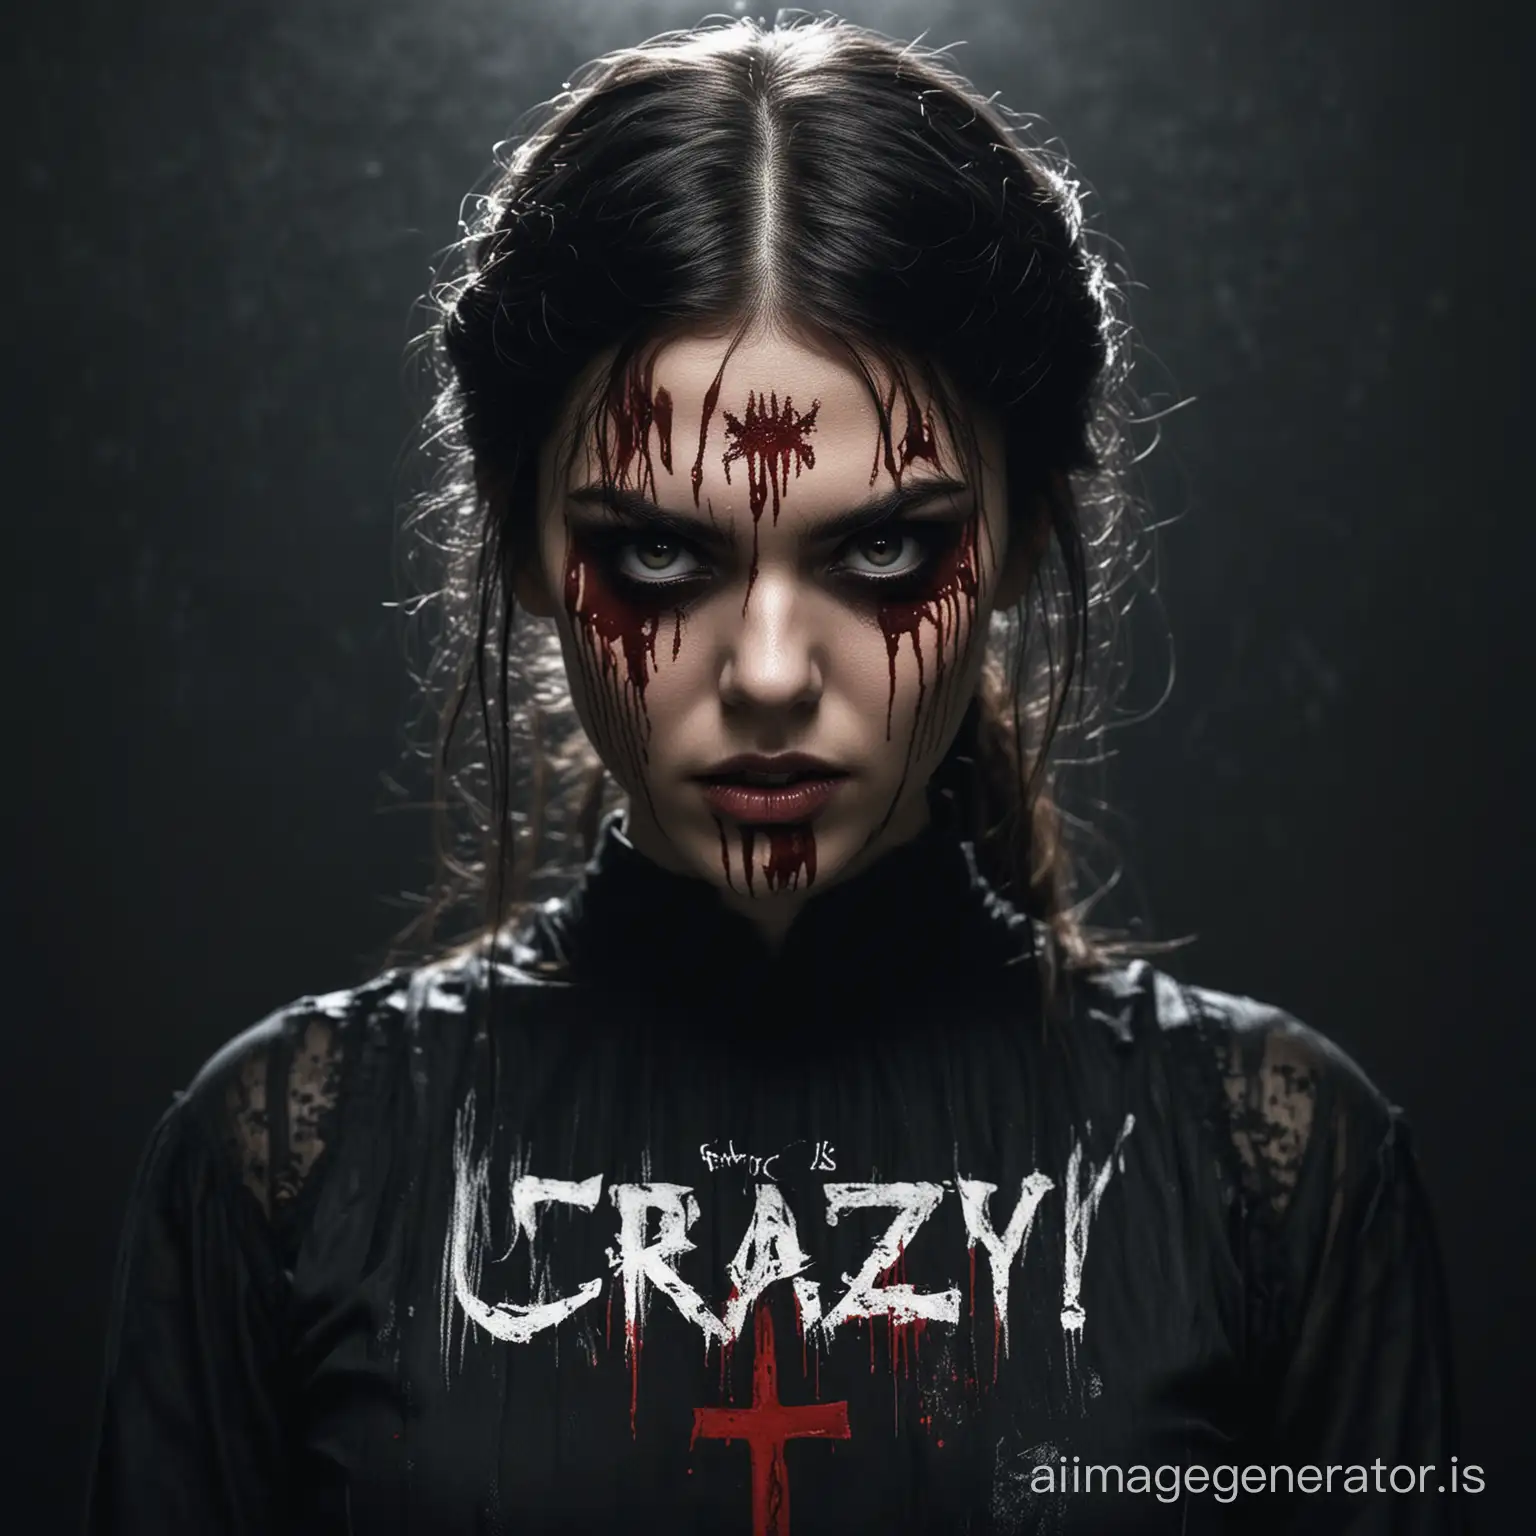 creepy dark haired girl with blood on her face and evil logo, wearing a dark dress, the eyes looking evil with crazy expression and covered dress